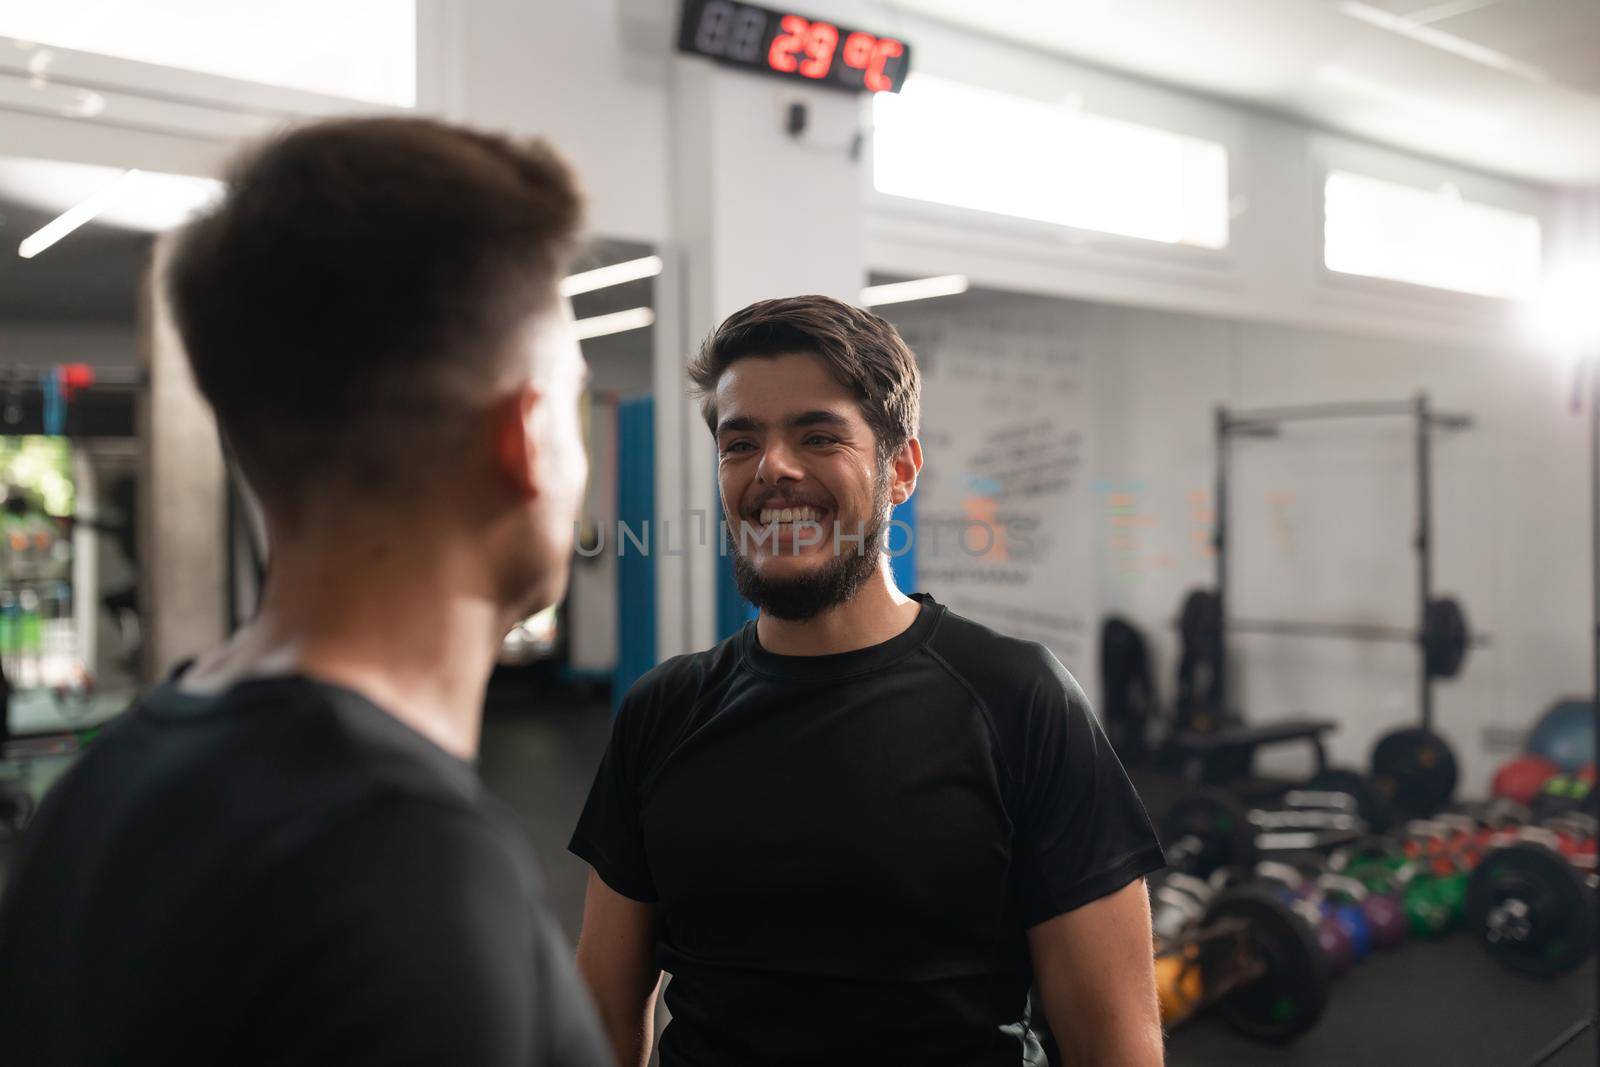 Two personal trainers smiling at each other at their workplace in the crossfit box